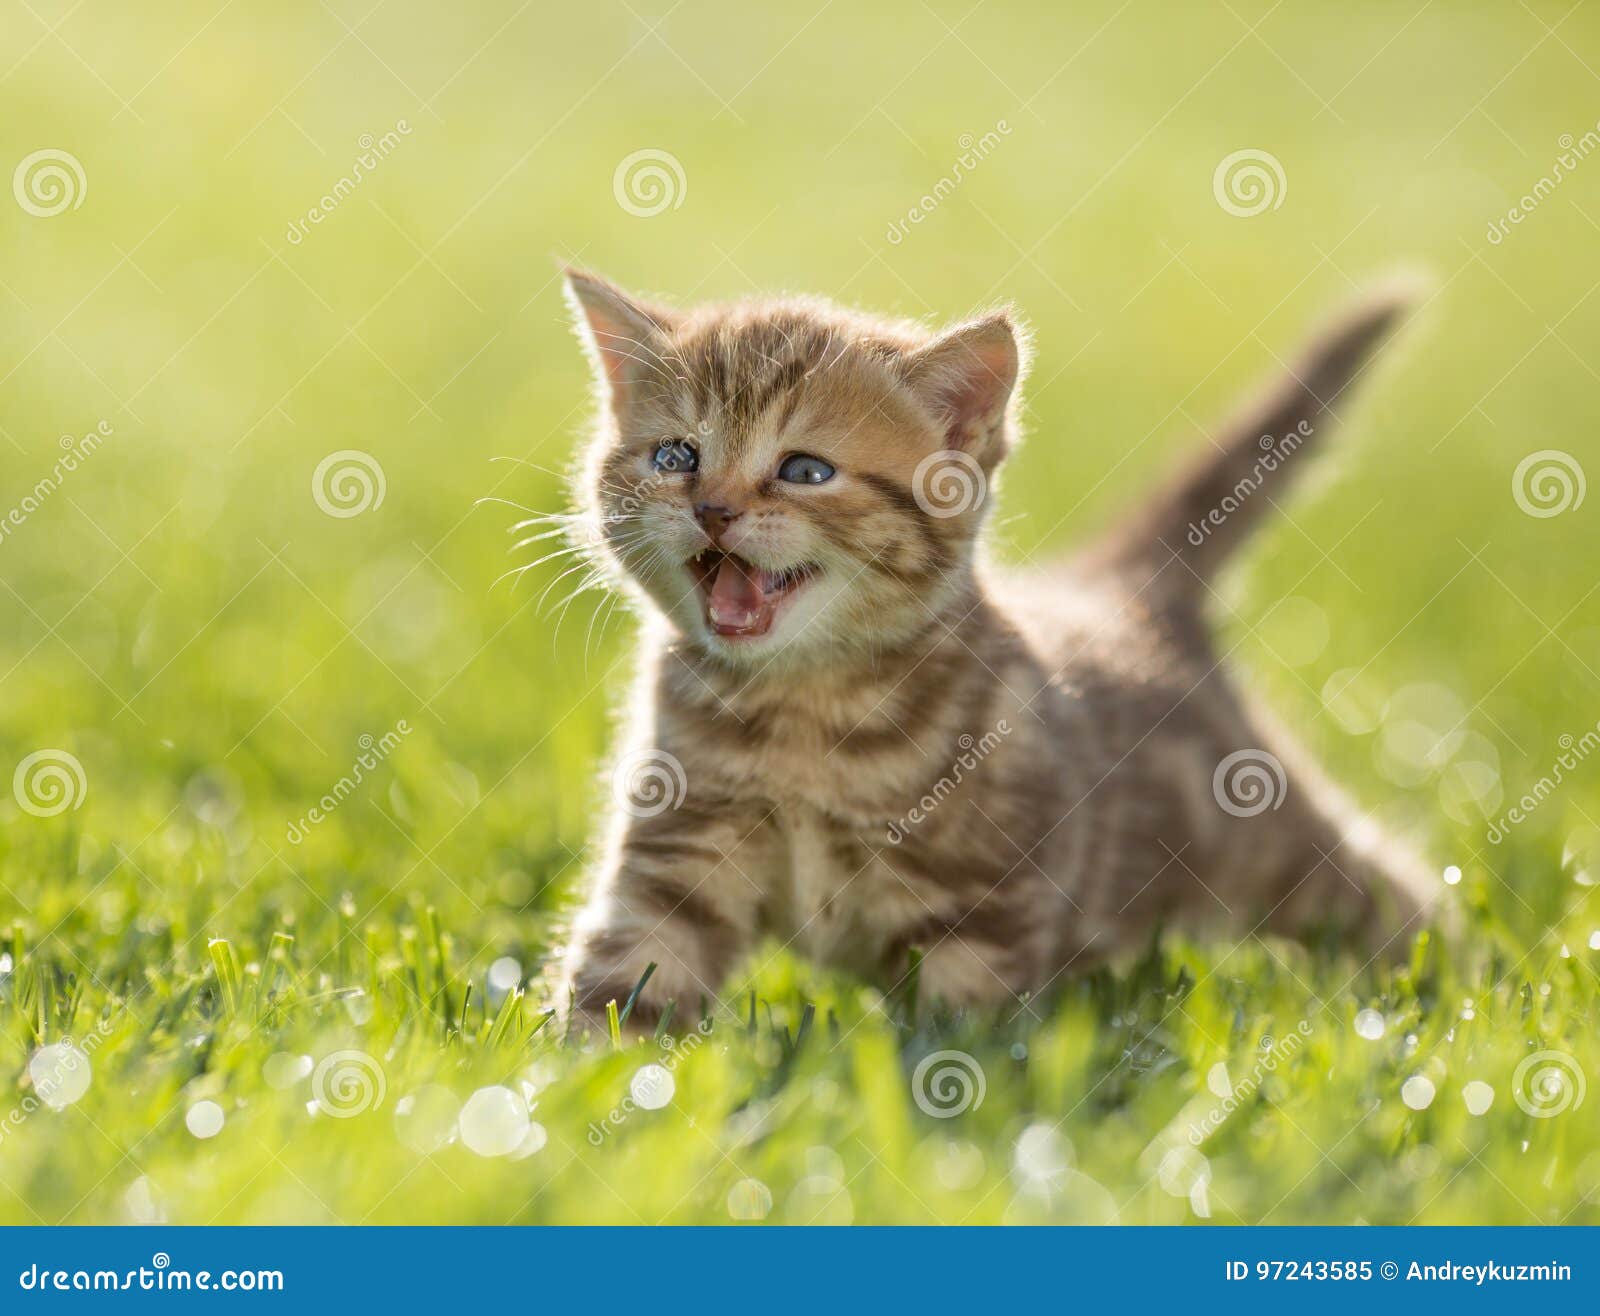 young kitten cat meowing in the green grass